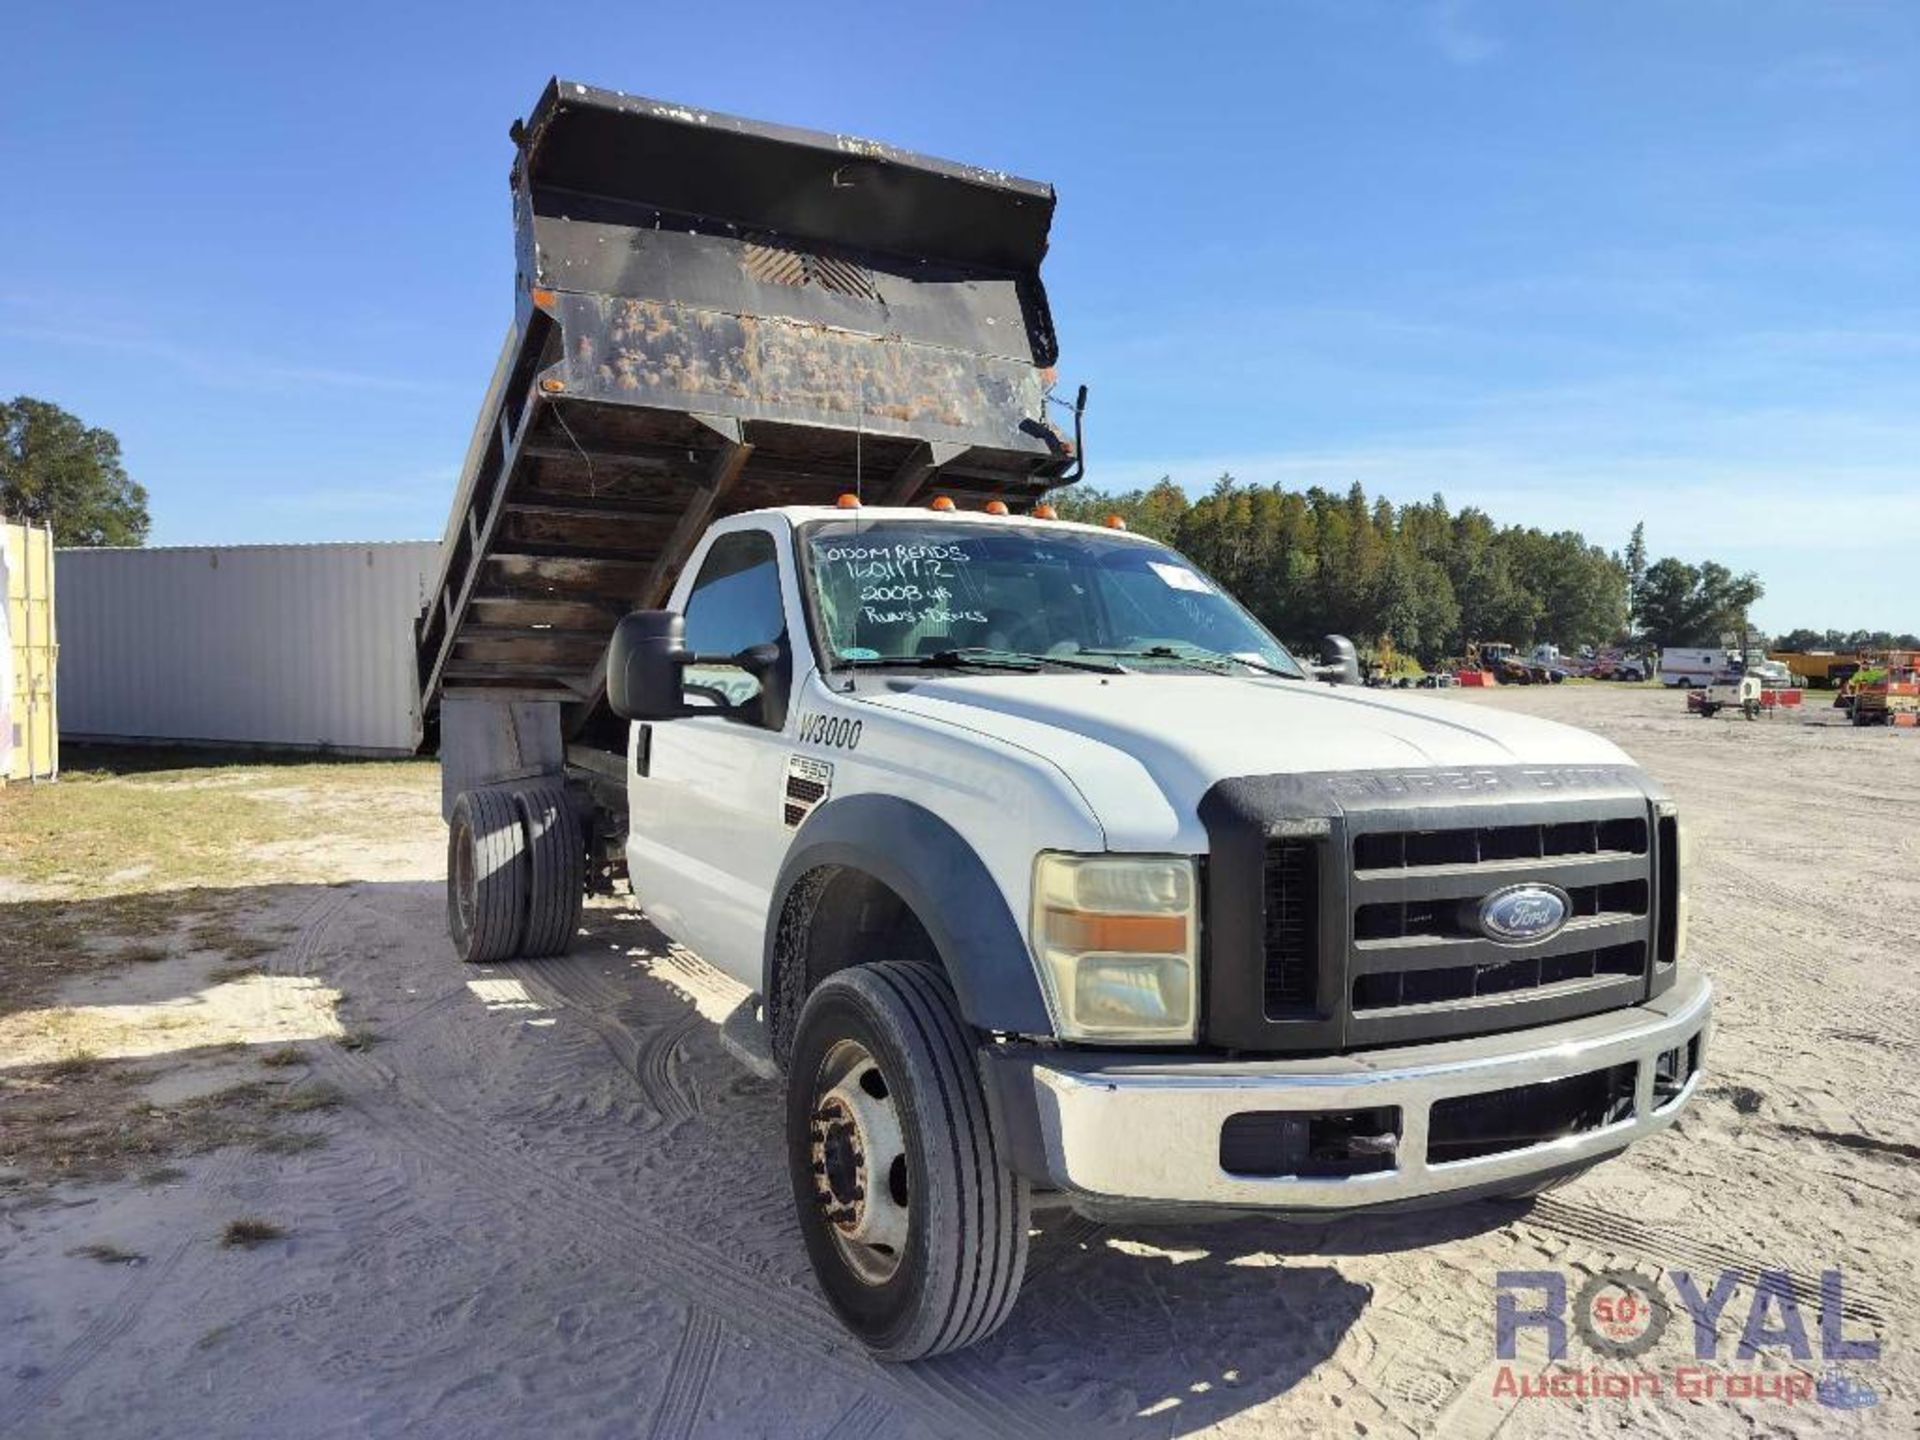 2008 Ford F350 Dump Truck - Image 2 of 26